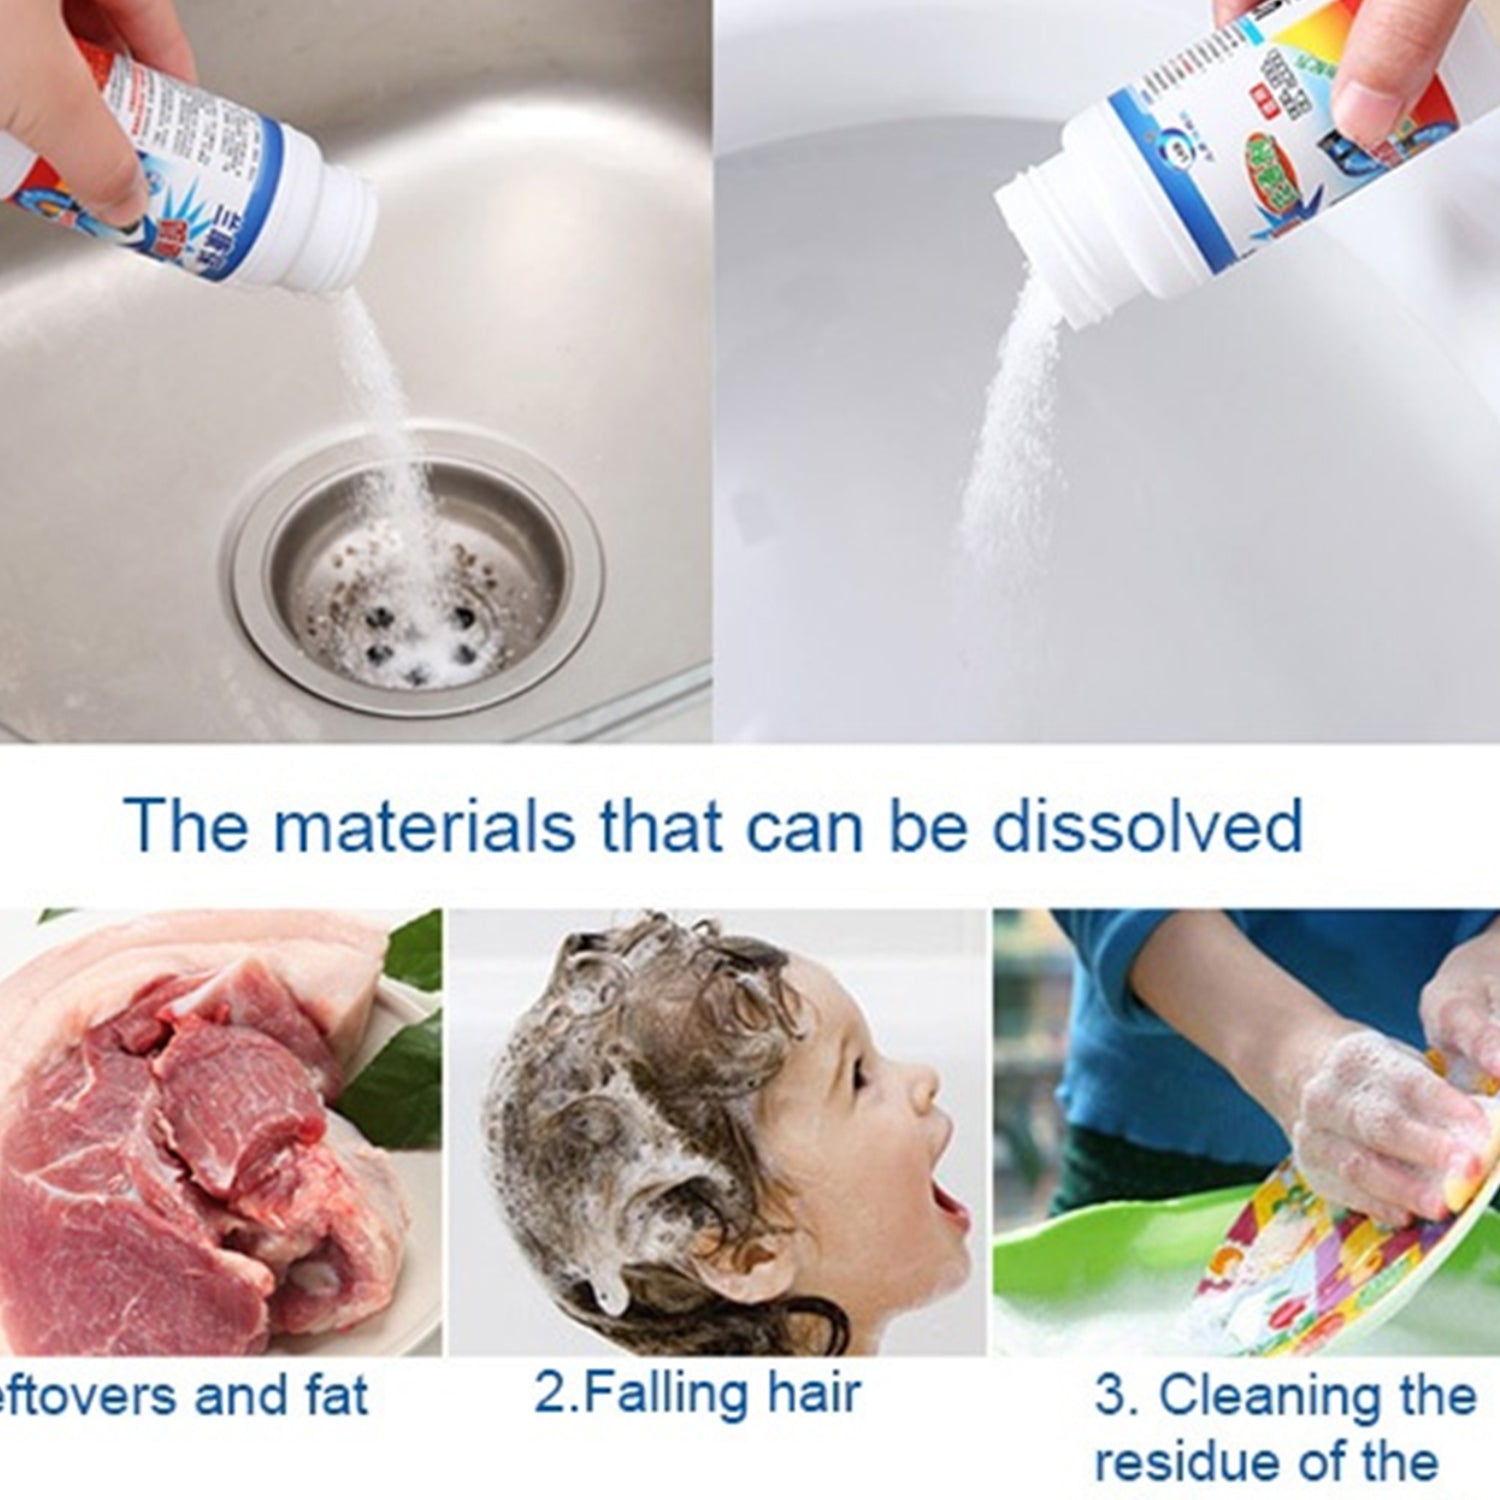 7768 POWERFUL SINK AND DRAIN CLEANER, PORTABLE POWDER CLEANING TOOL SUPER CLOG REMOVER CHEMICAL POWDER AGENT FOR KITCHEN TOILET PIPE DREDGING